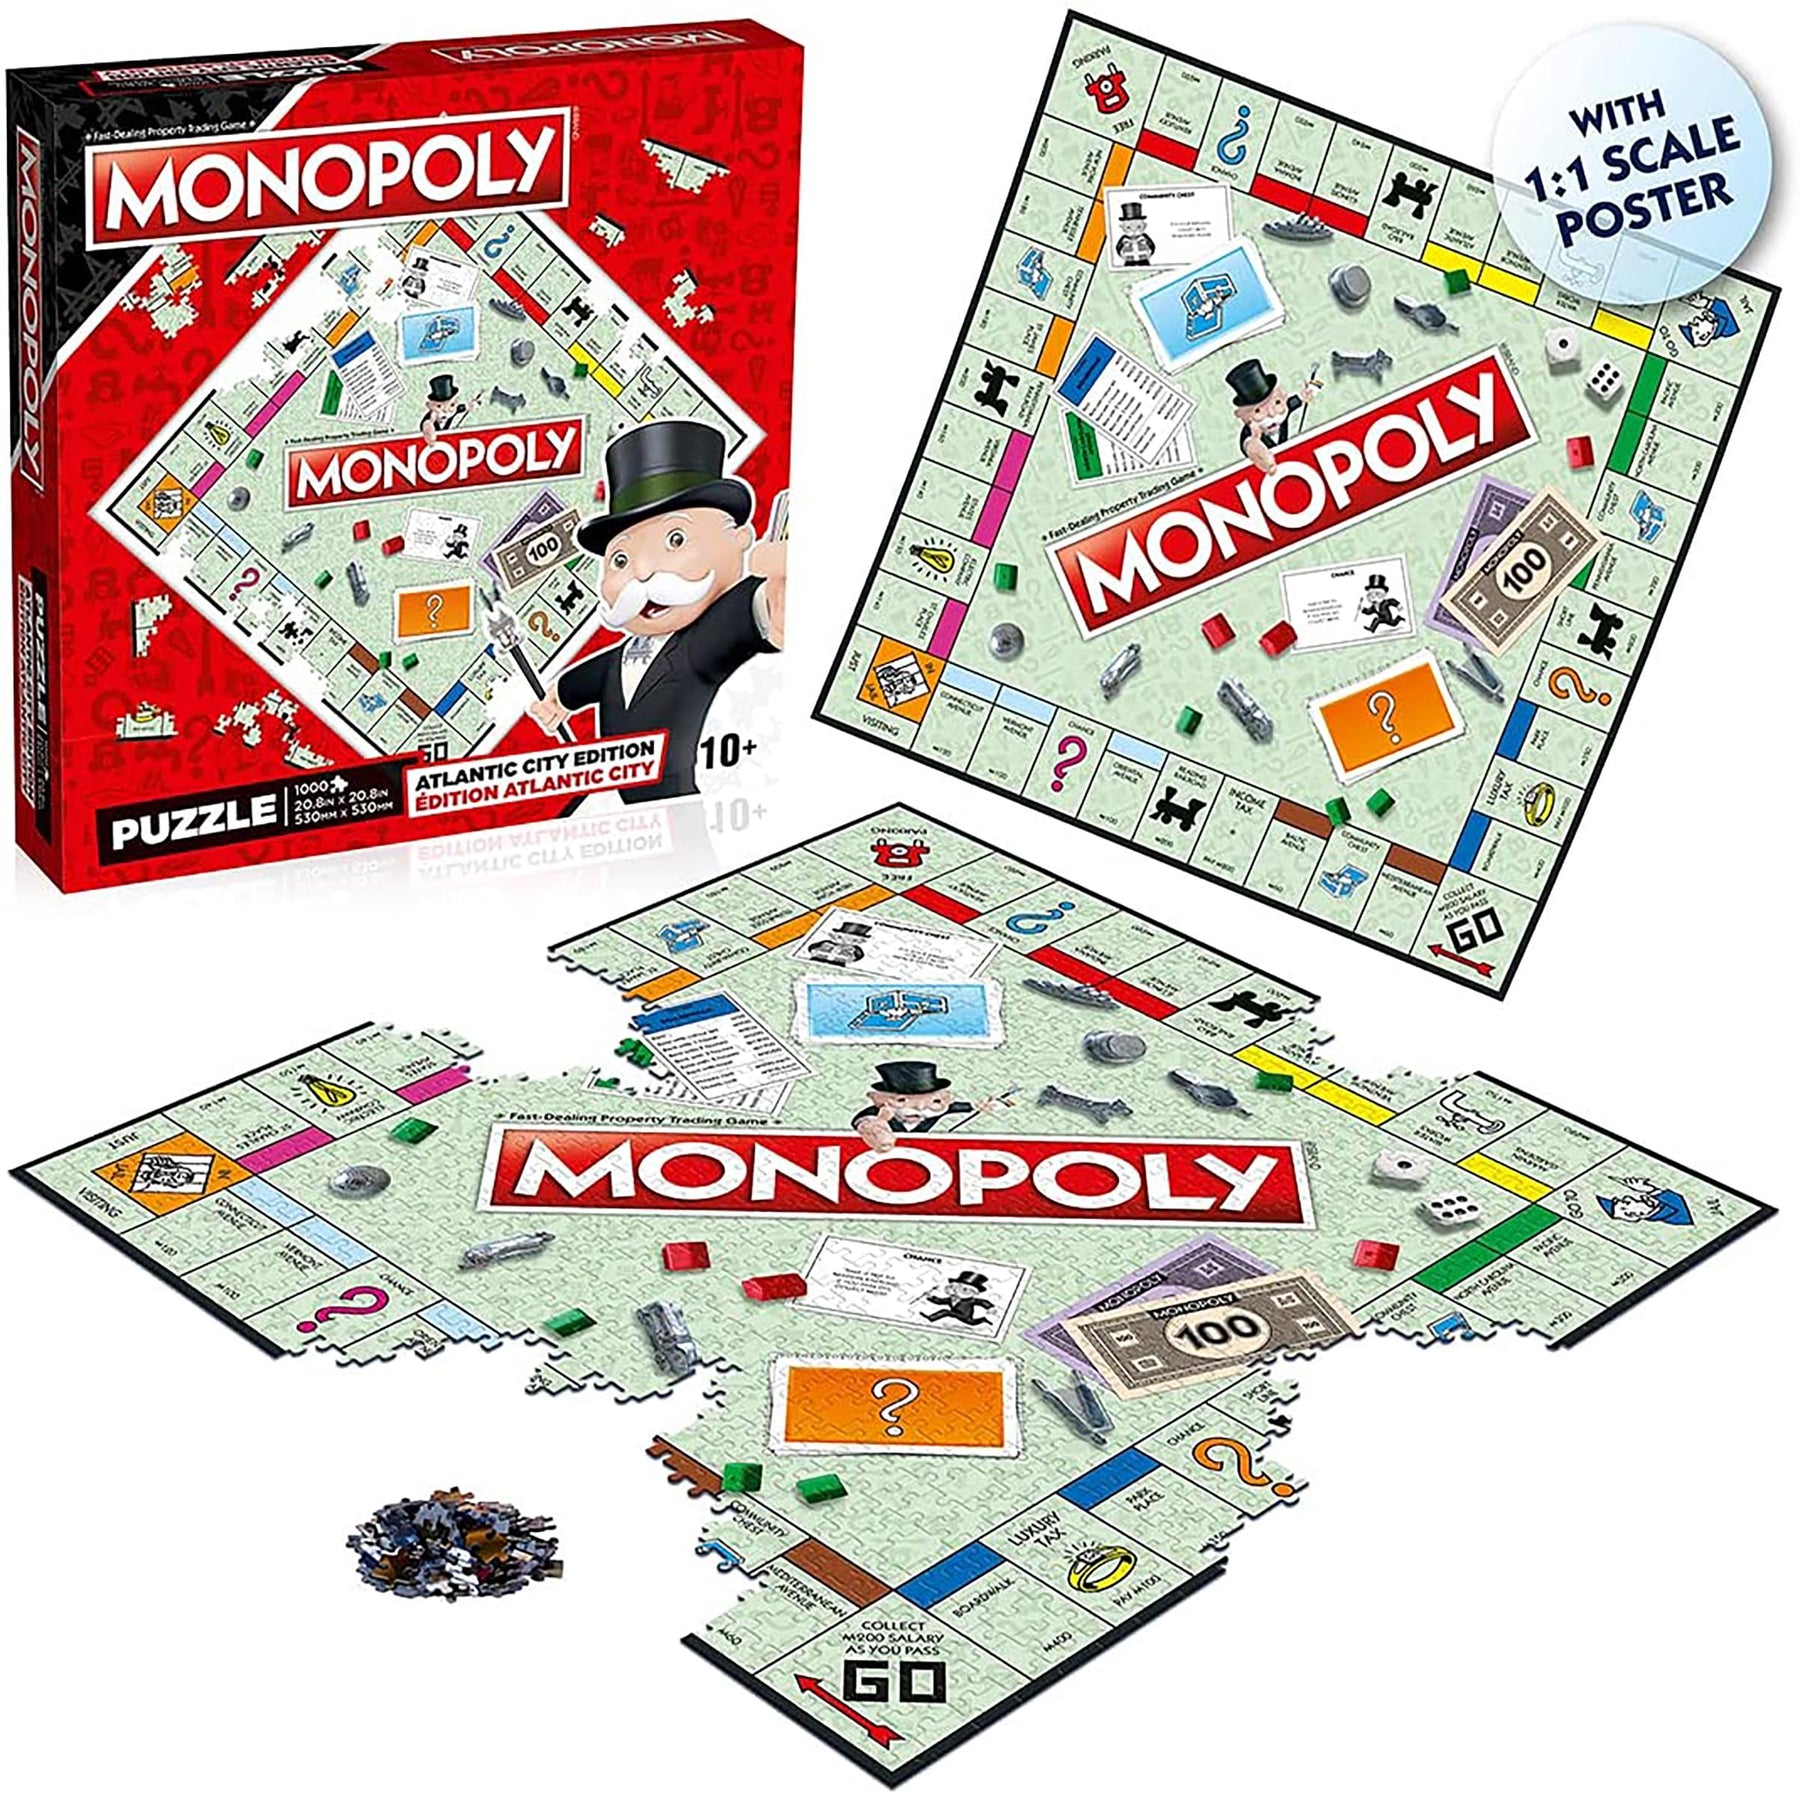 Monopoly Board Game 1000 Piece Jigsaw Puzzle